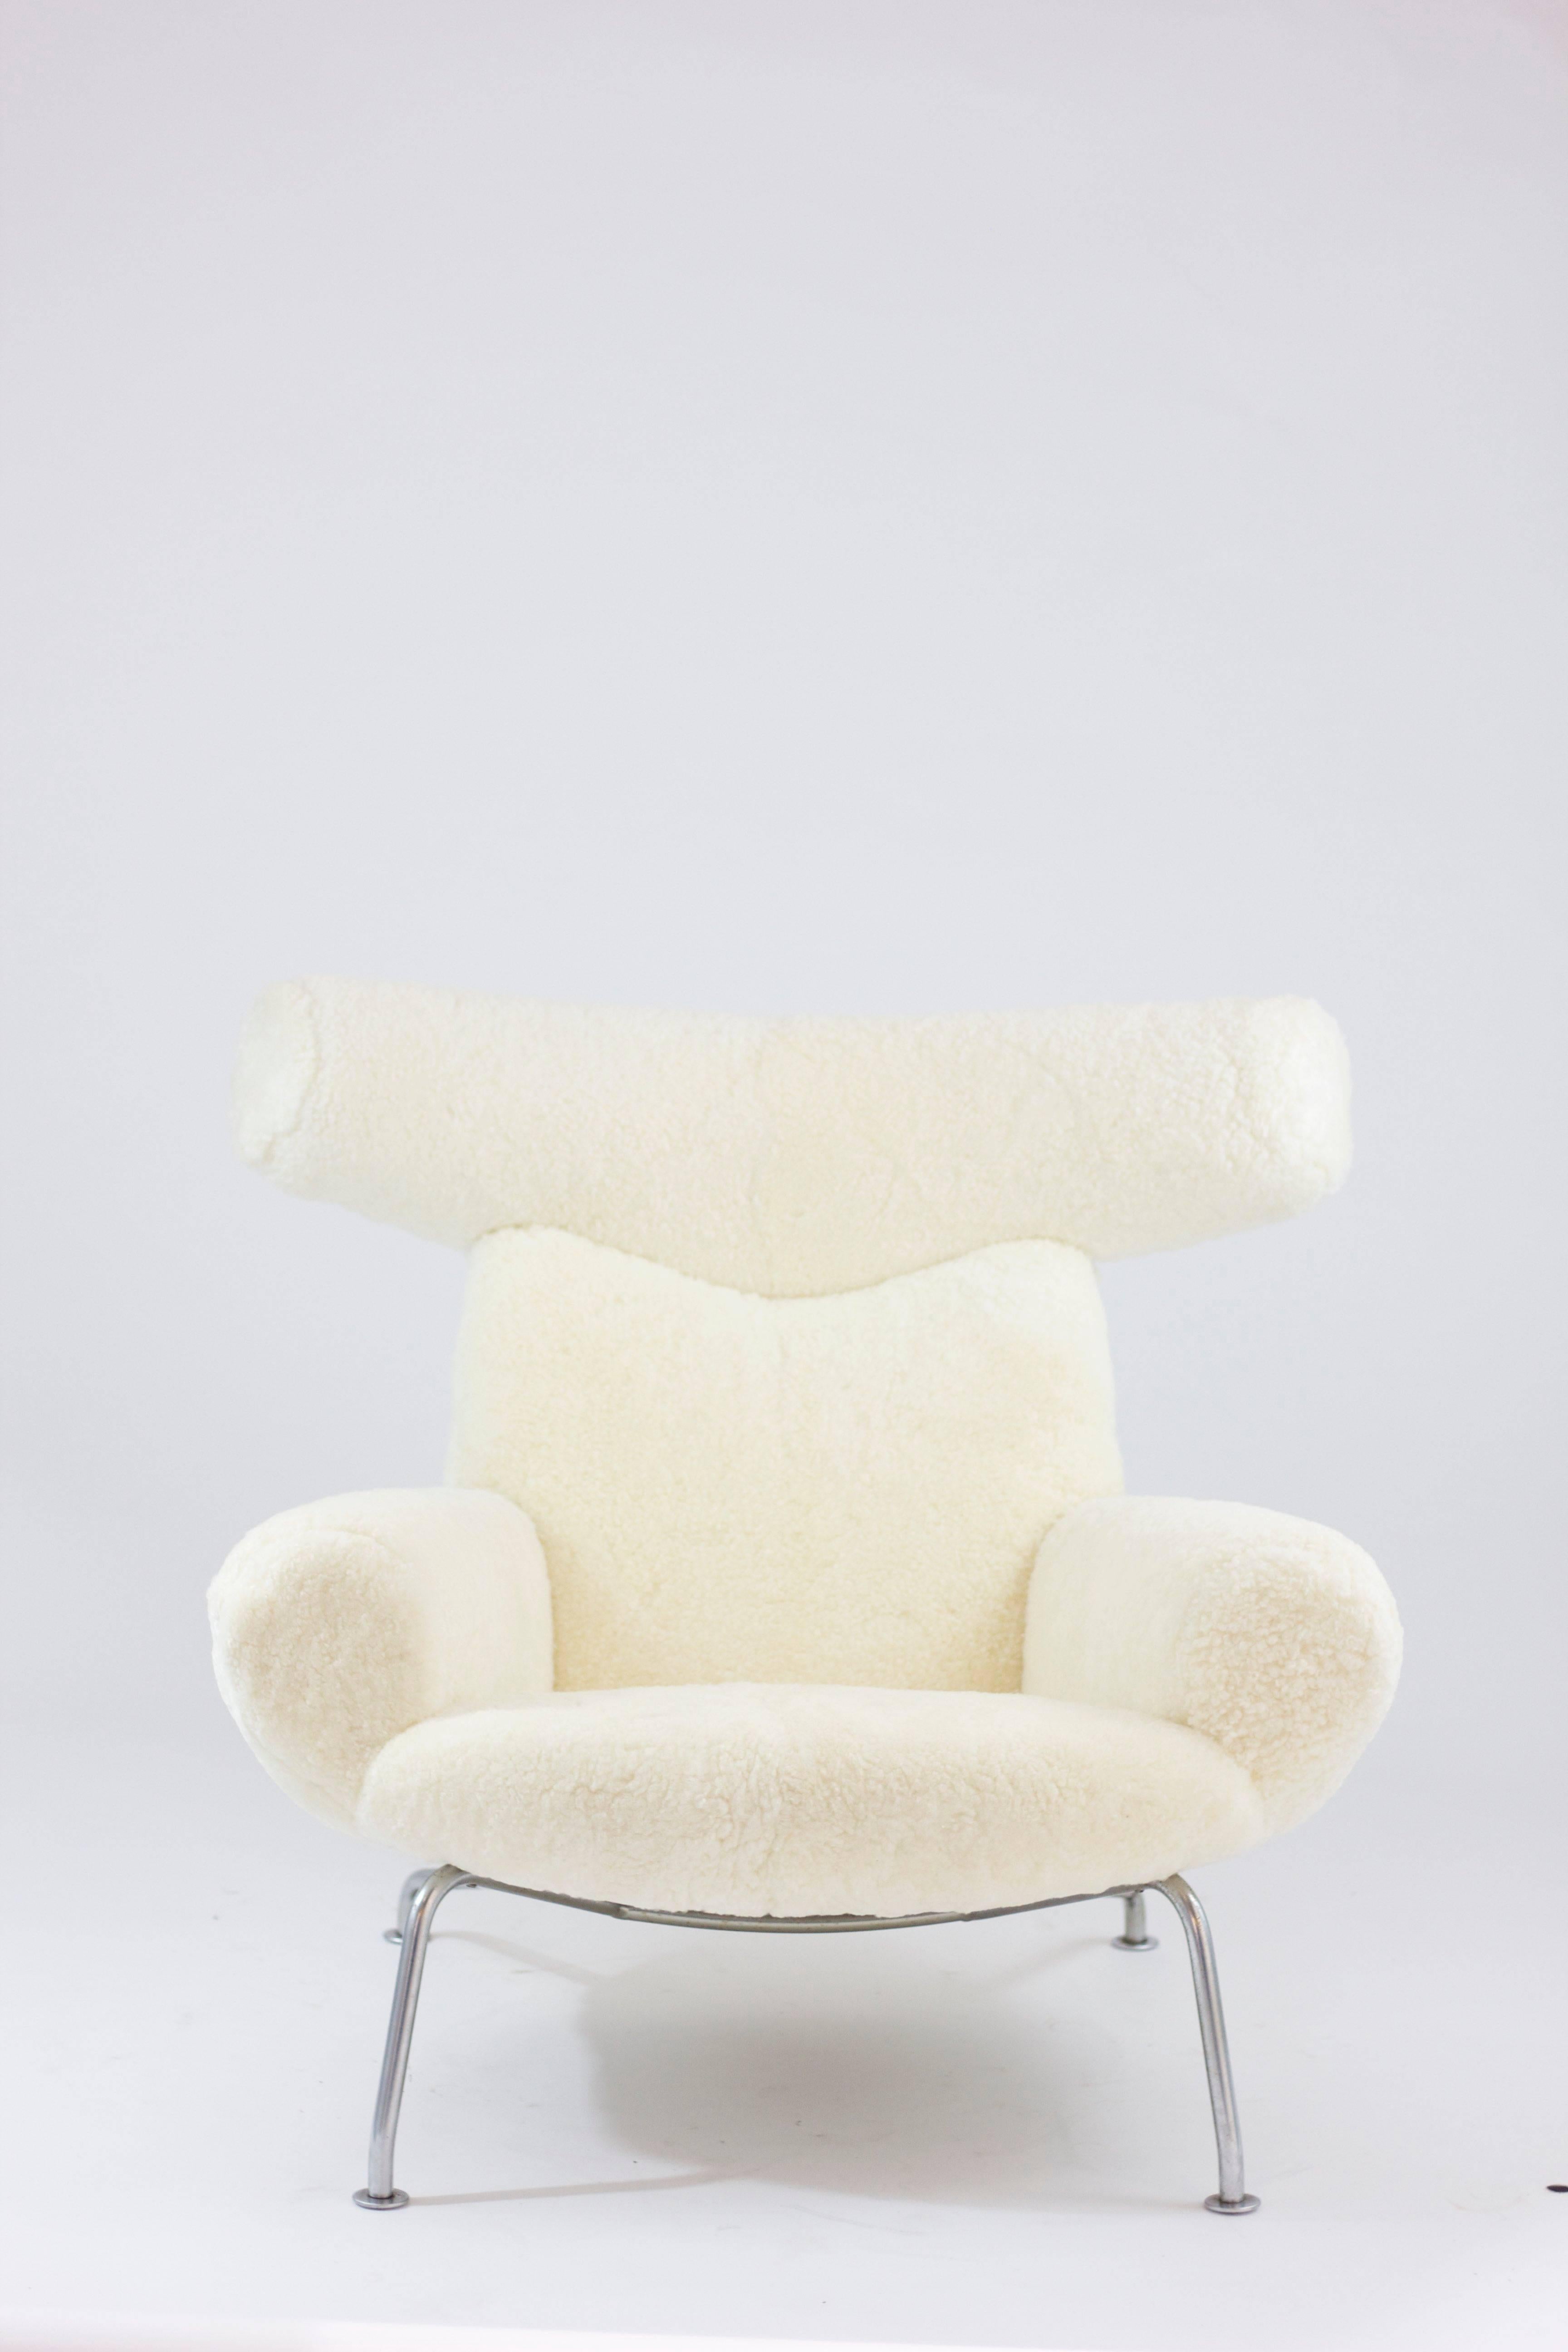 Midcentury, Scandinavian.
Iconic Hans Wegner Ox chair in newly reupholstered luxurious sheepskin fur. This modern design will complete any room and add a collector's touch.